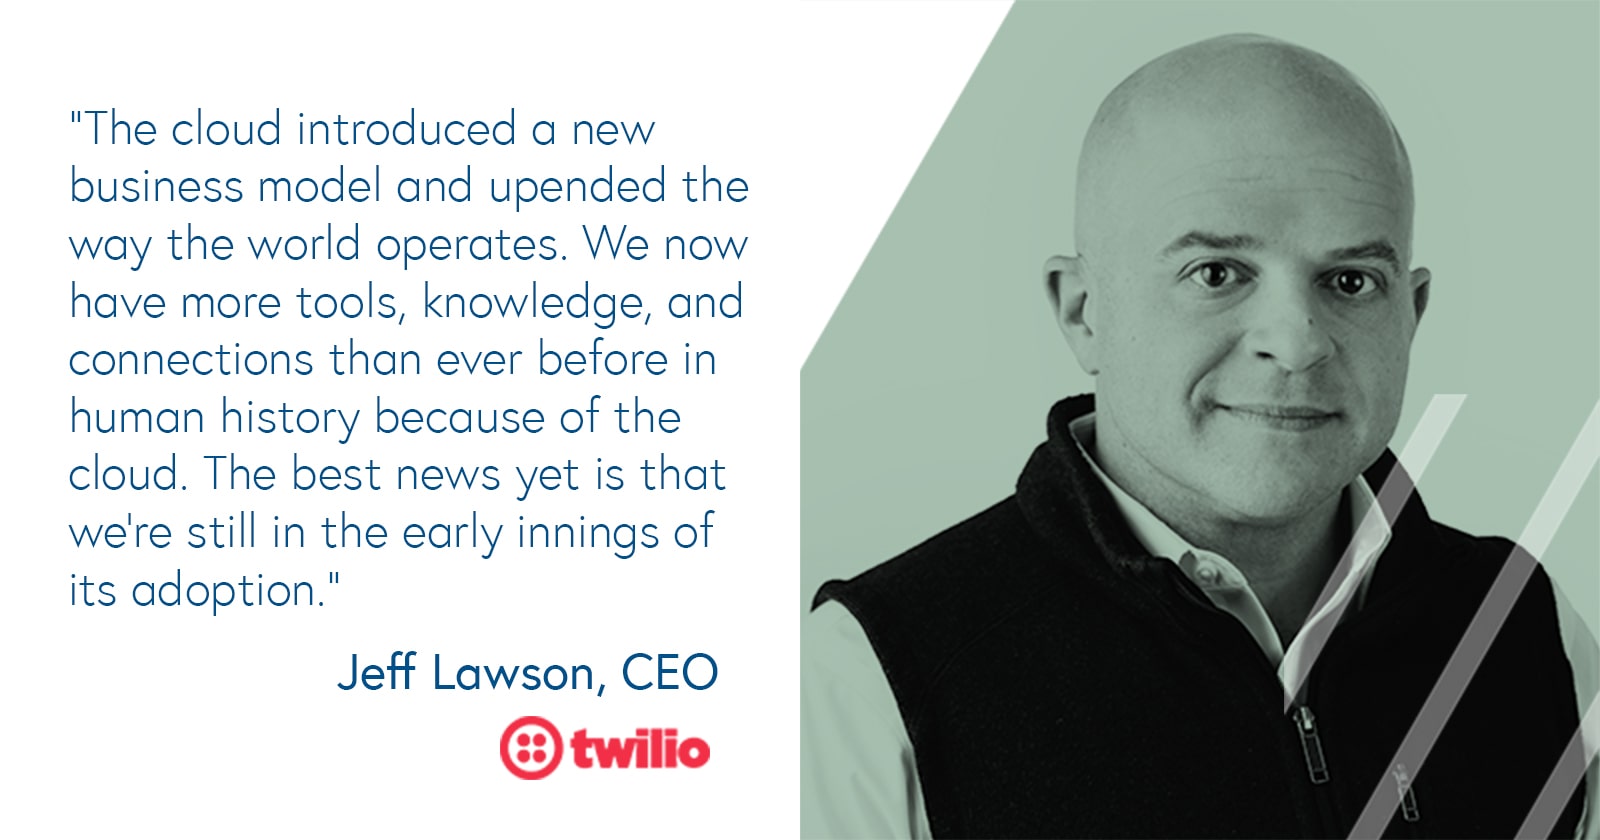 Jeff Lawson, CEO of Twilio on how the cloud upended the way the world operates 